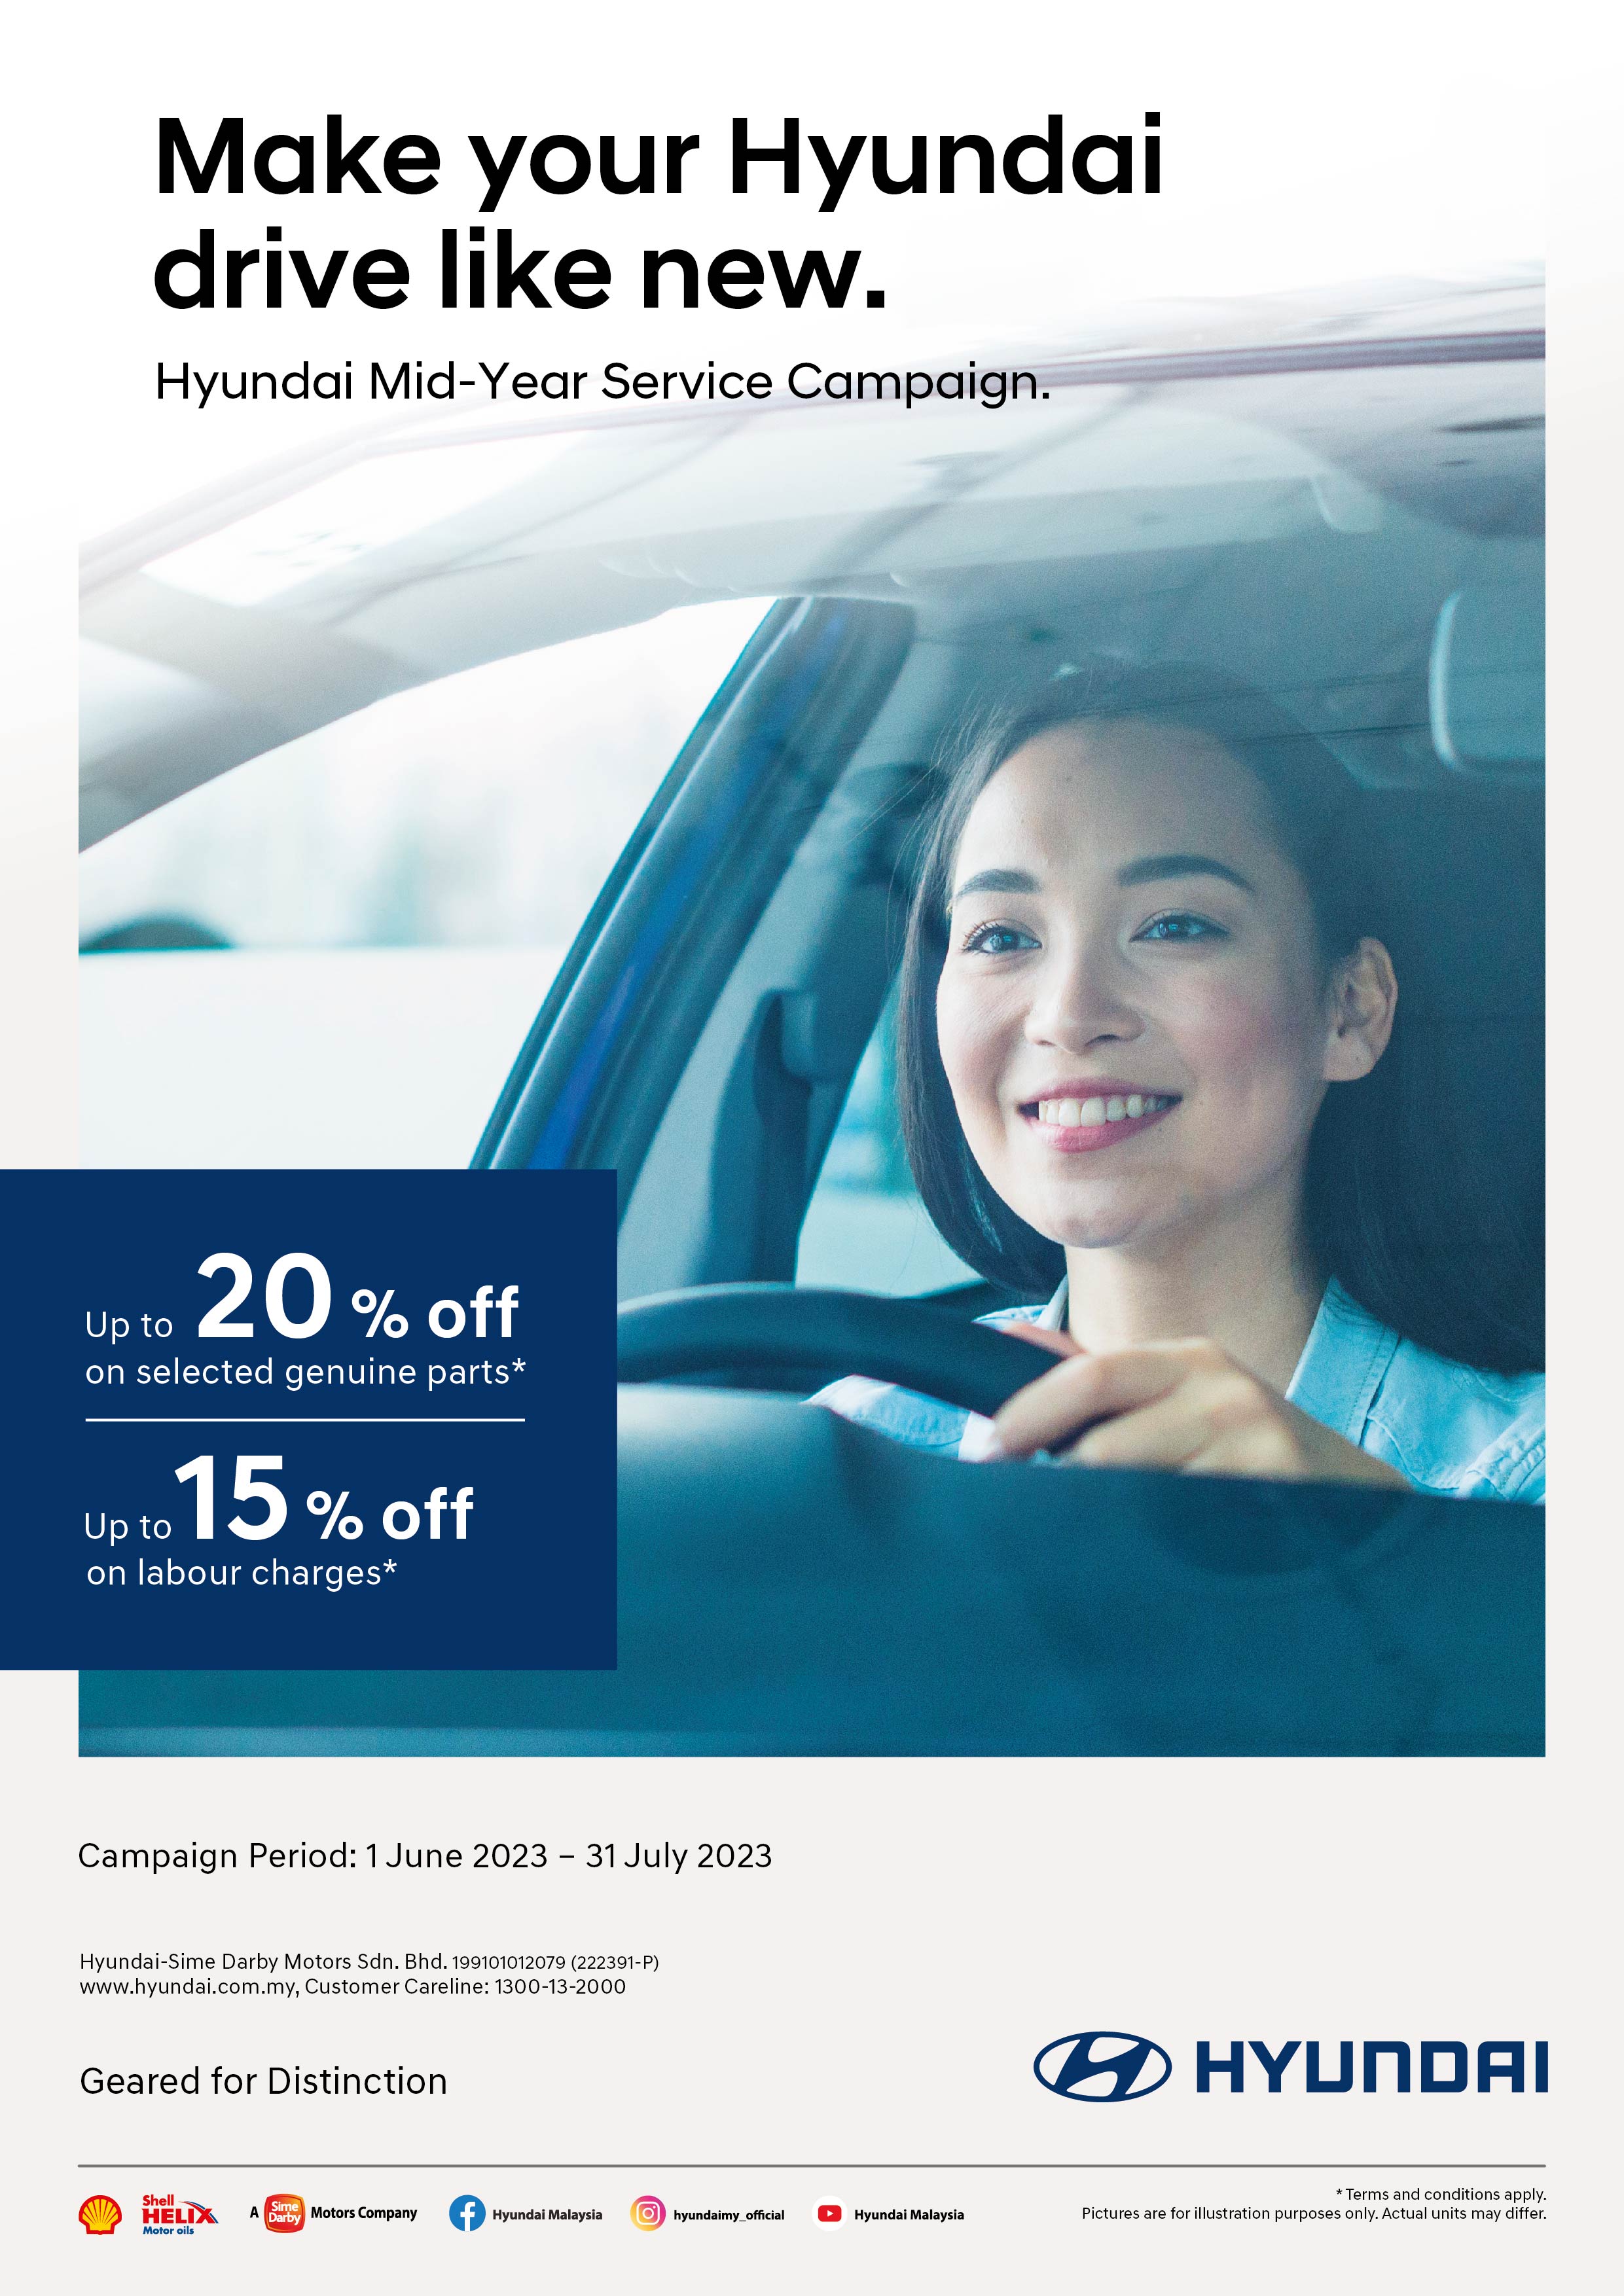 Make your Hyundai drive like new. Hyundai Mid-Year Service Campaign. | Up to 20% off on selected genuine parts* | Up to 15% off on labour charges* | Campaign Period : 1 June 2023 - 31 July 2023 | Terms and conditions apply.